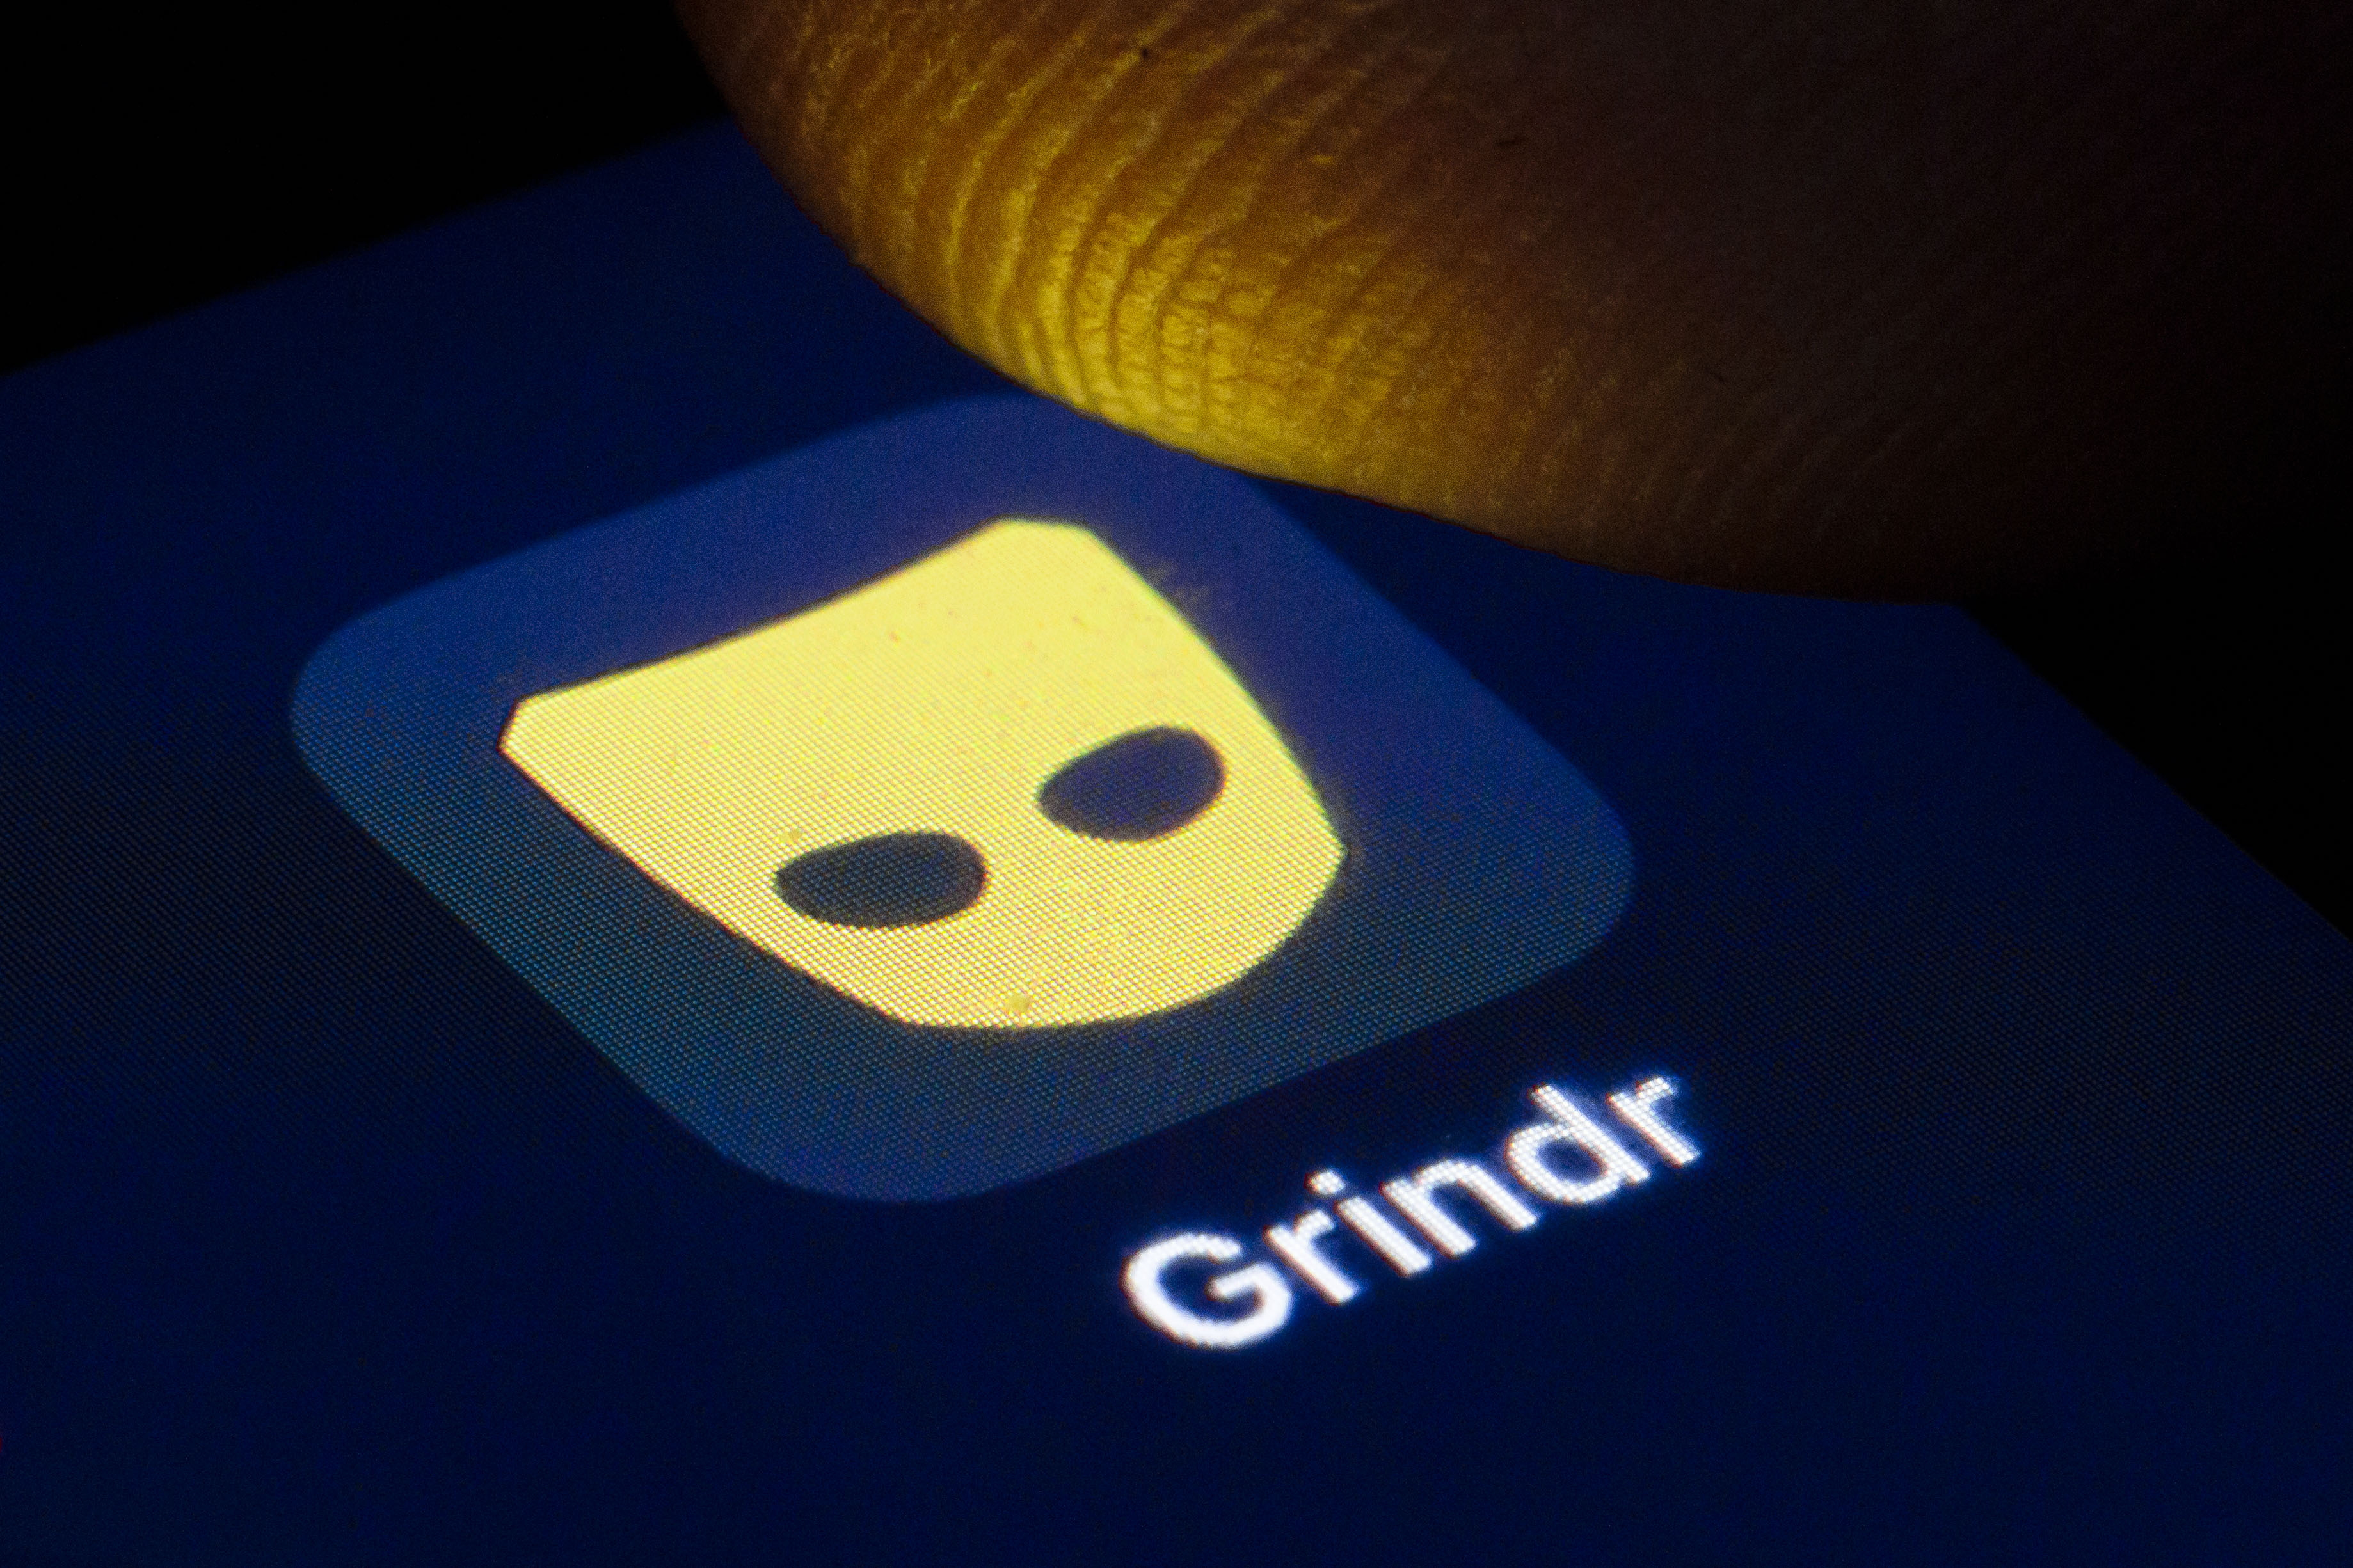 Grindr is going public with a $2.1 billion valuation